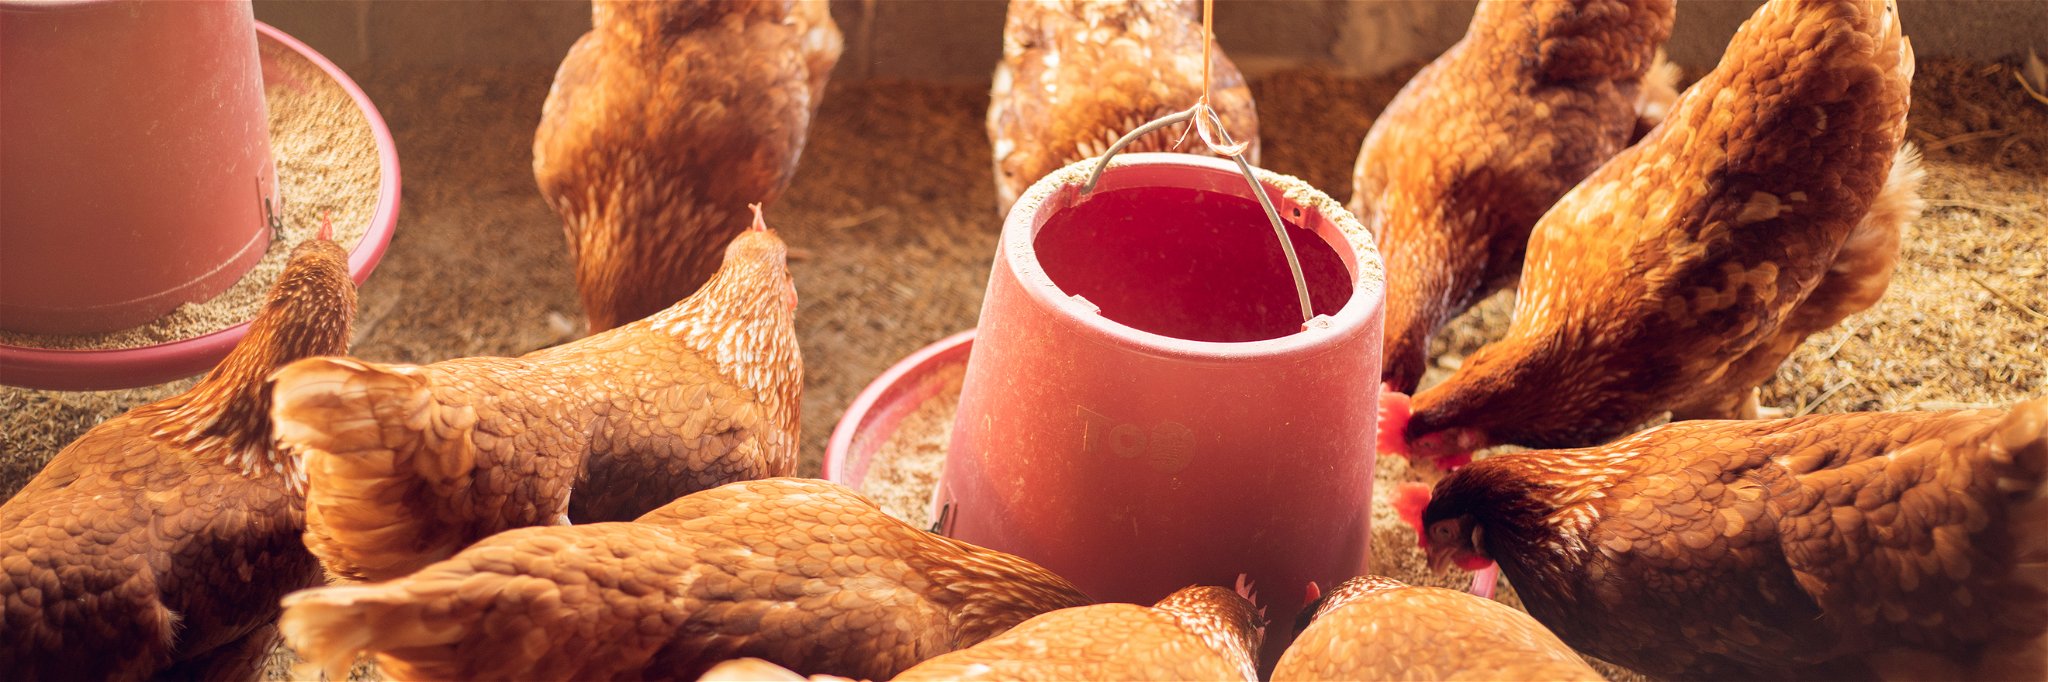 Dunkin' Donuts Commits 100% Cage-Free Eggs by 2025&nbsp;